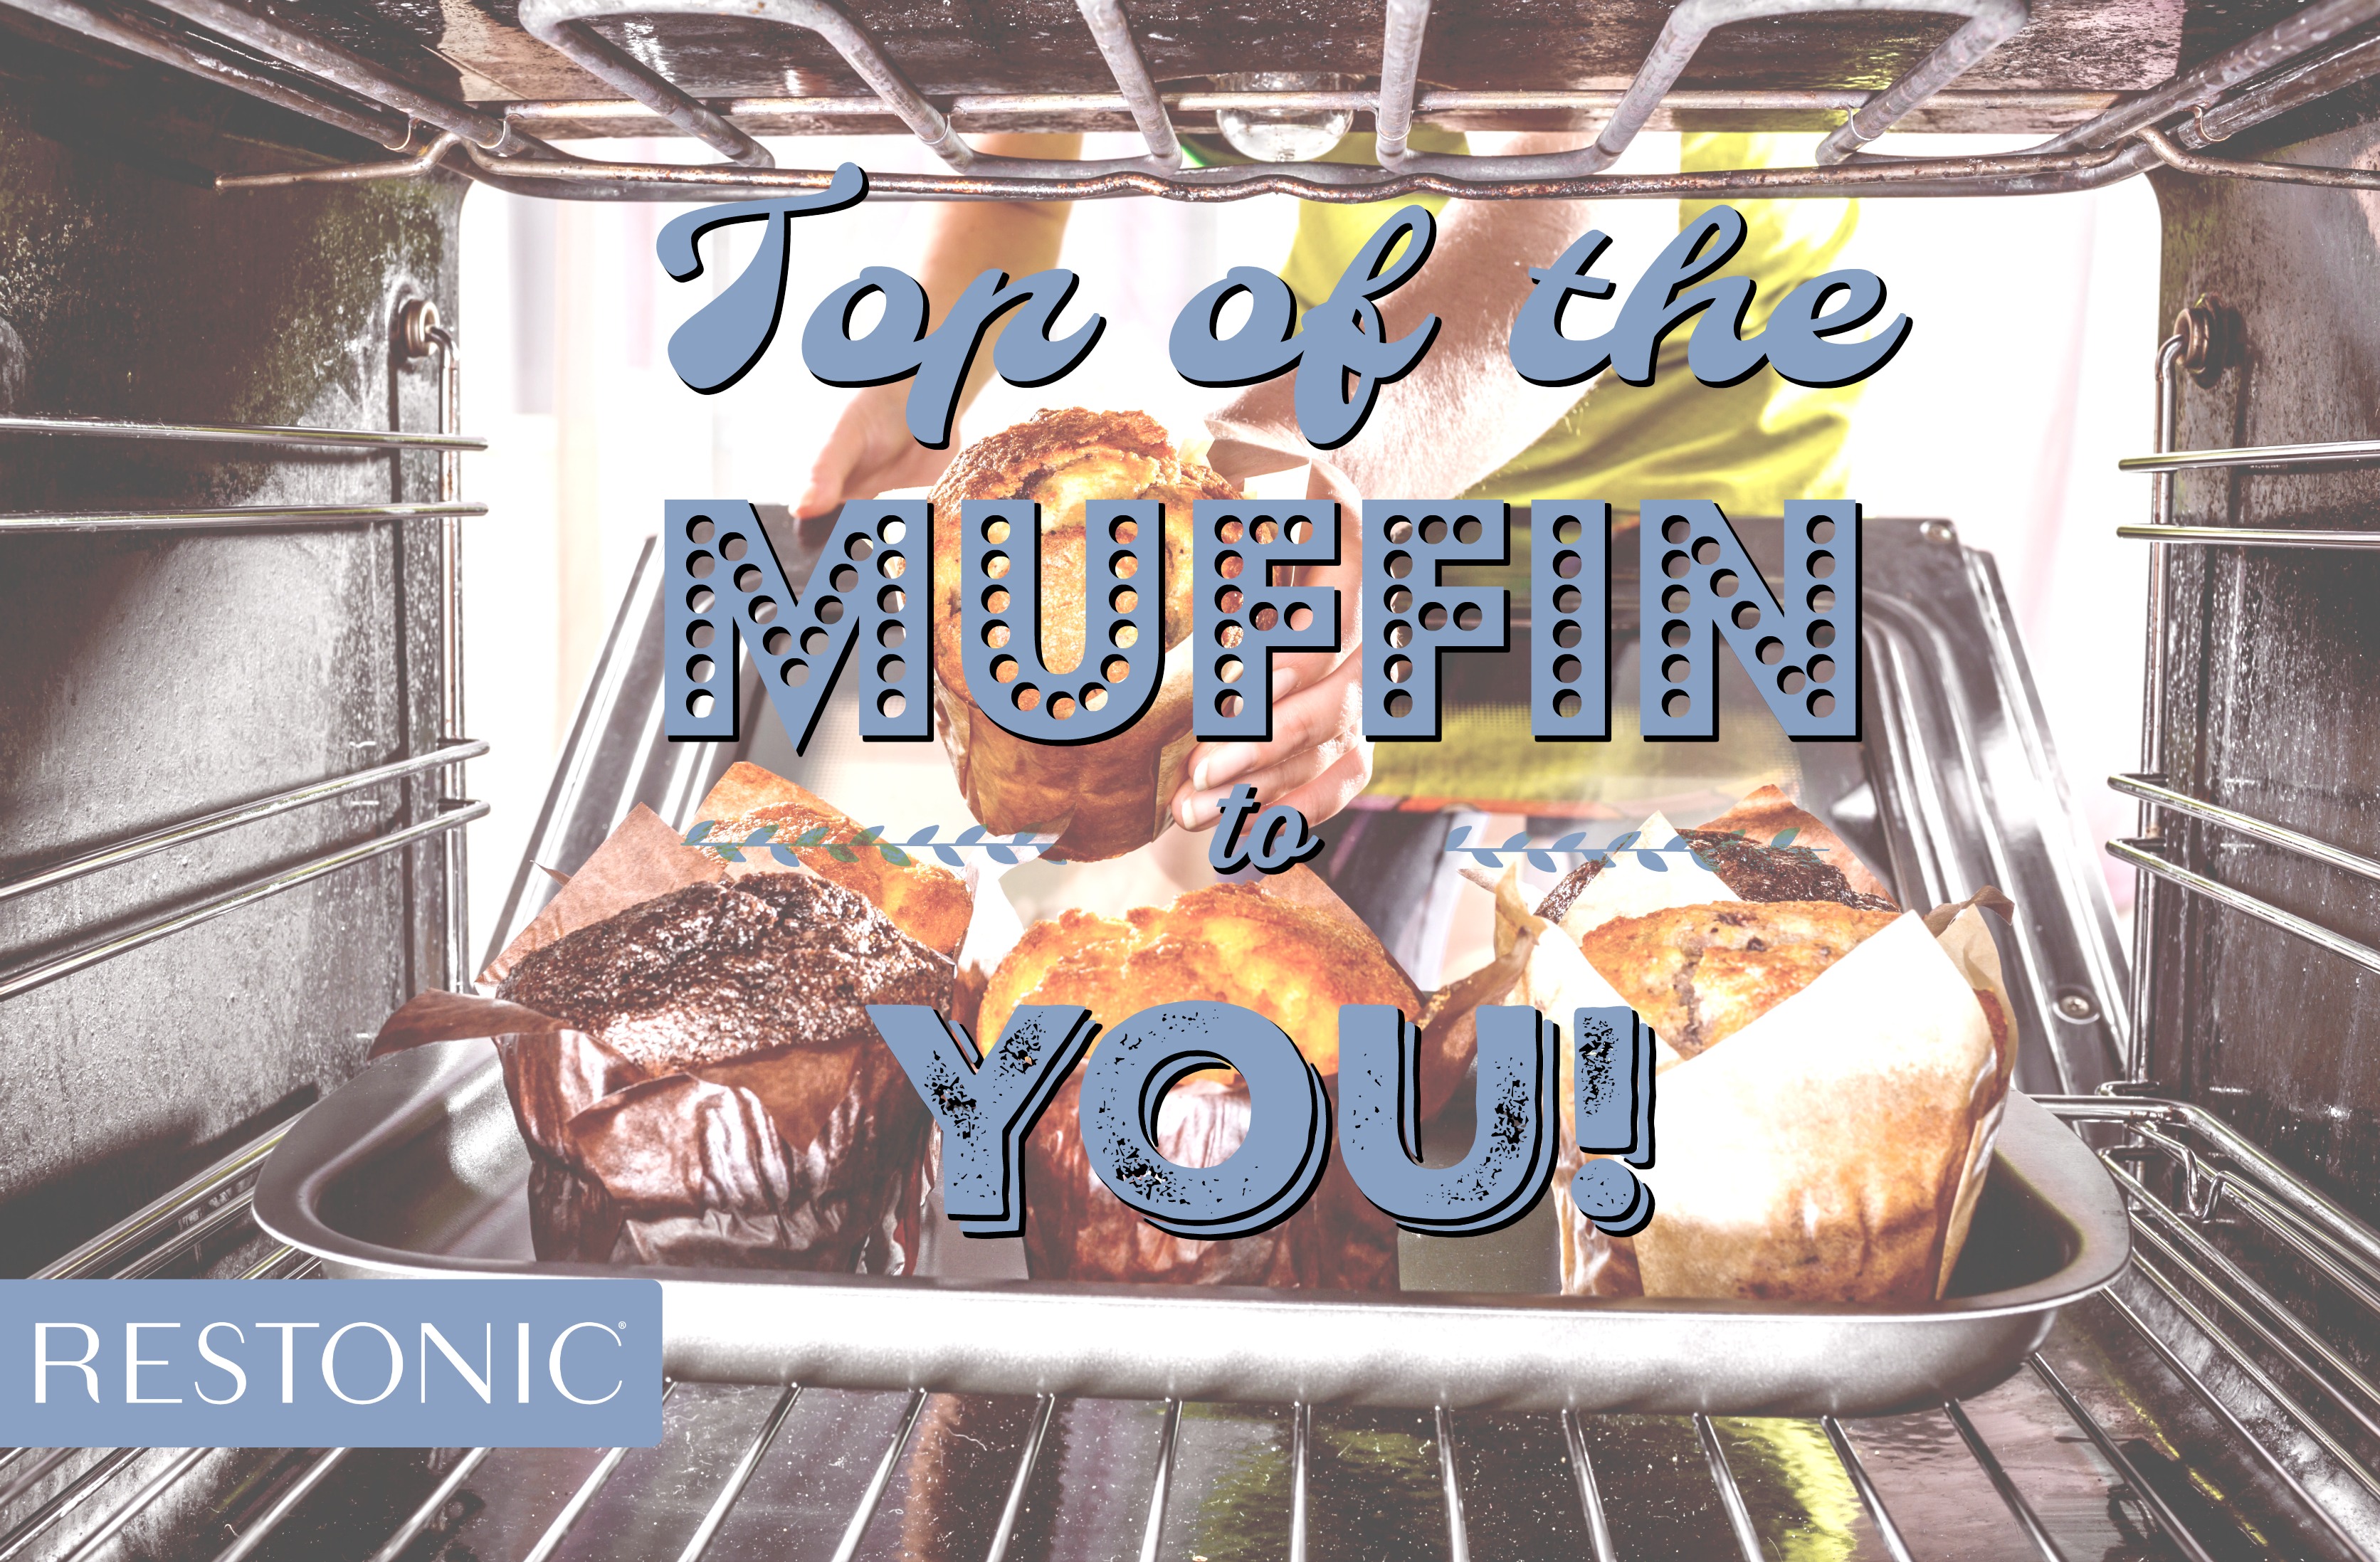 Breakfast muffin recipes to kickstart your day.